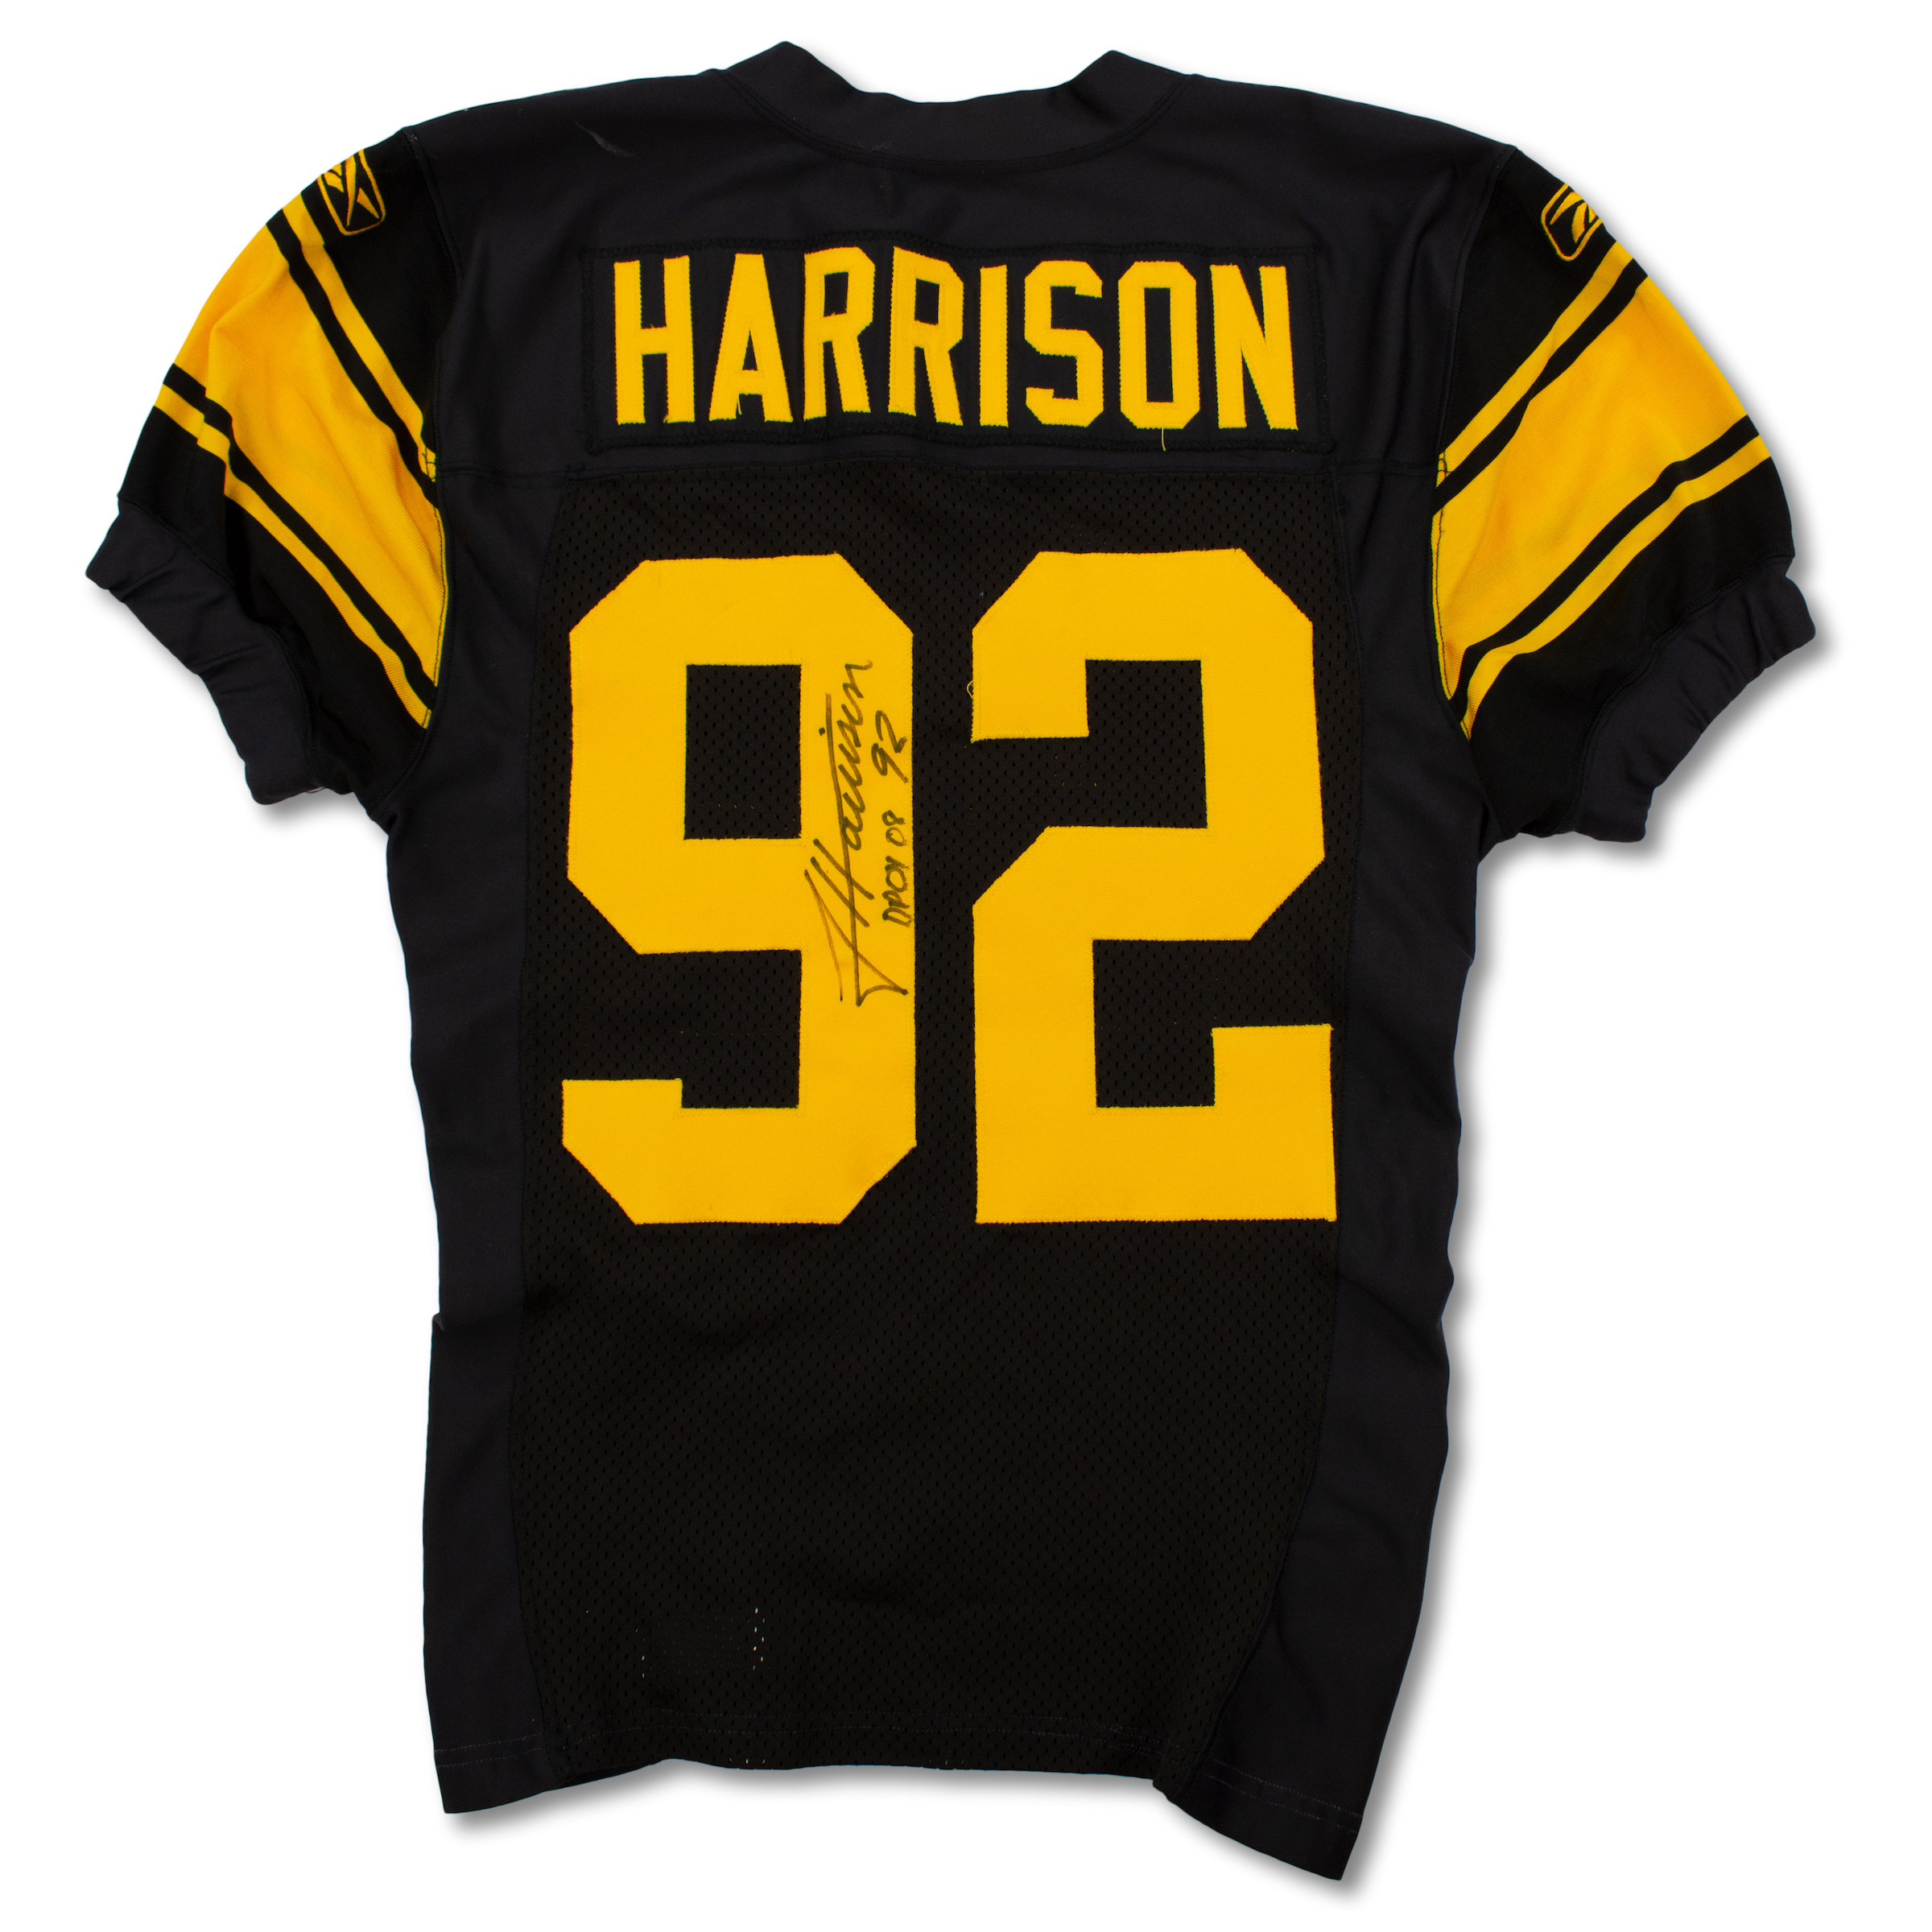 steelers game issued jersey